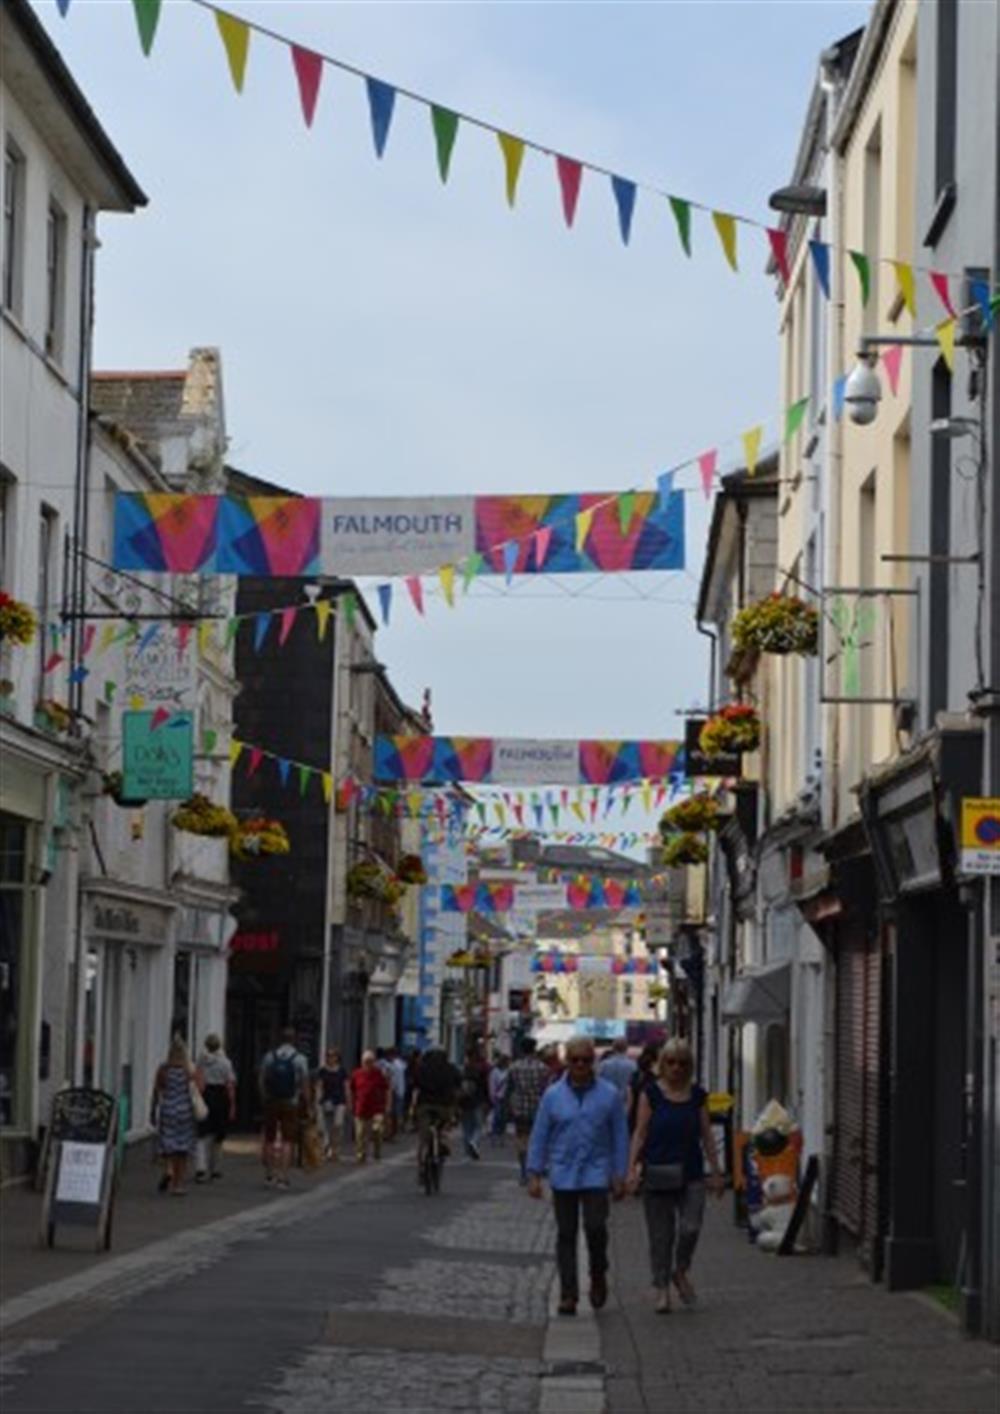  Falmouth town has an array of shops, plus a range of restaurants, cafes and art galleries at Halliards in Helford Passage